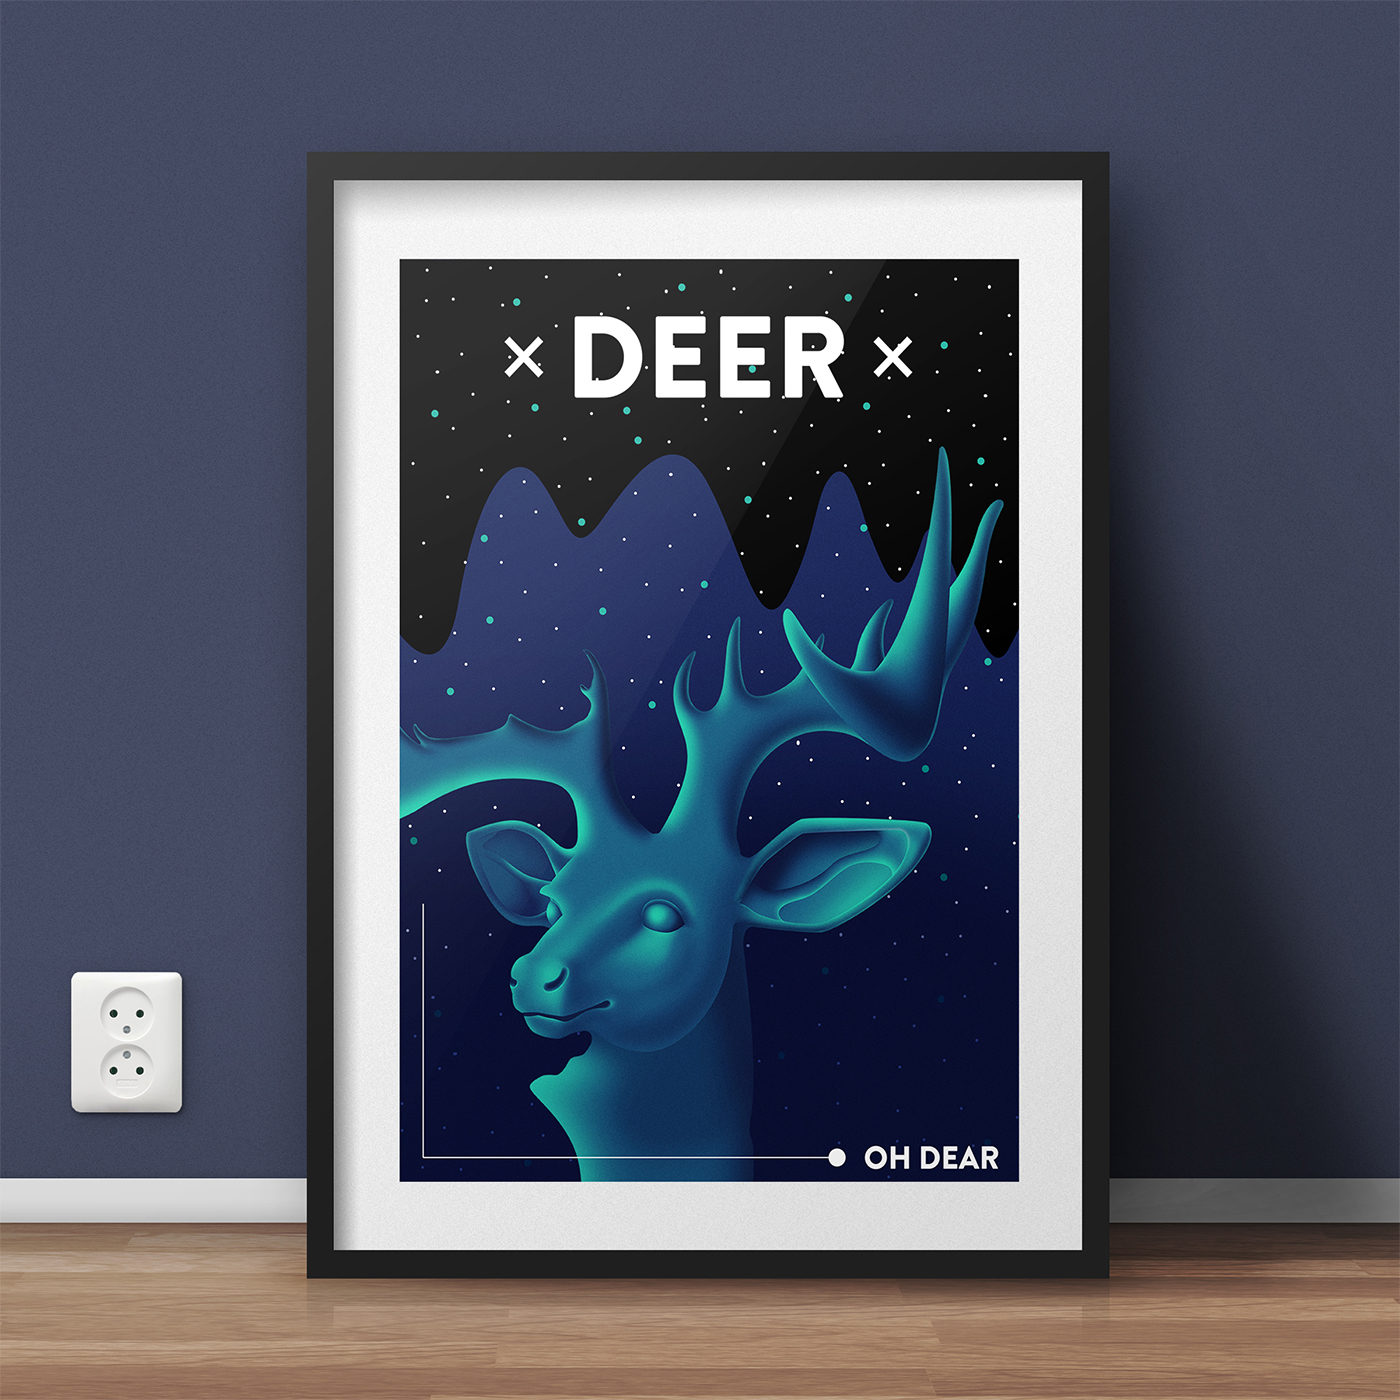 deer dear poster blue green stars animal stag antlers photoshop